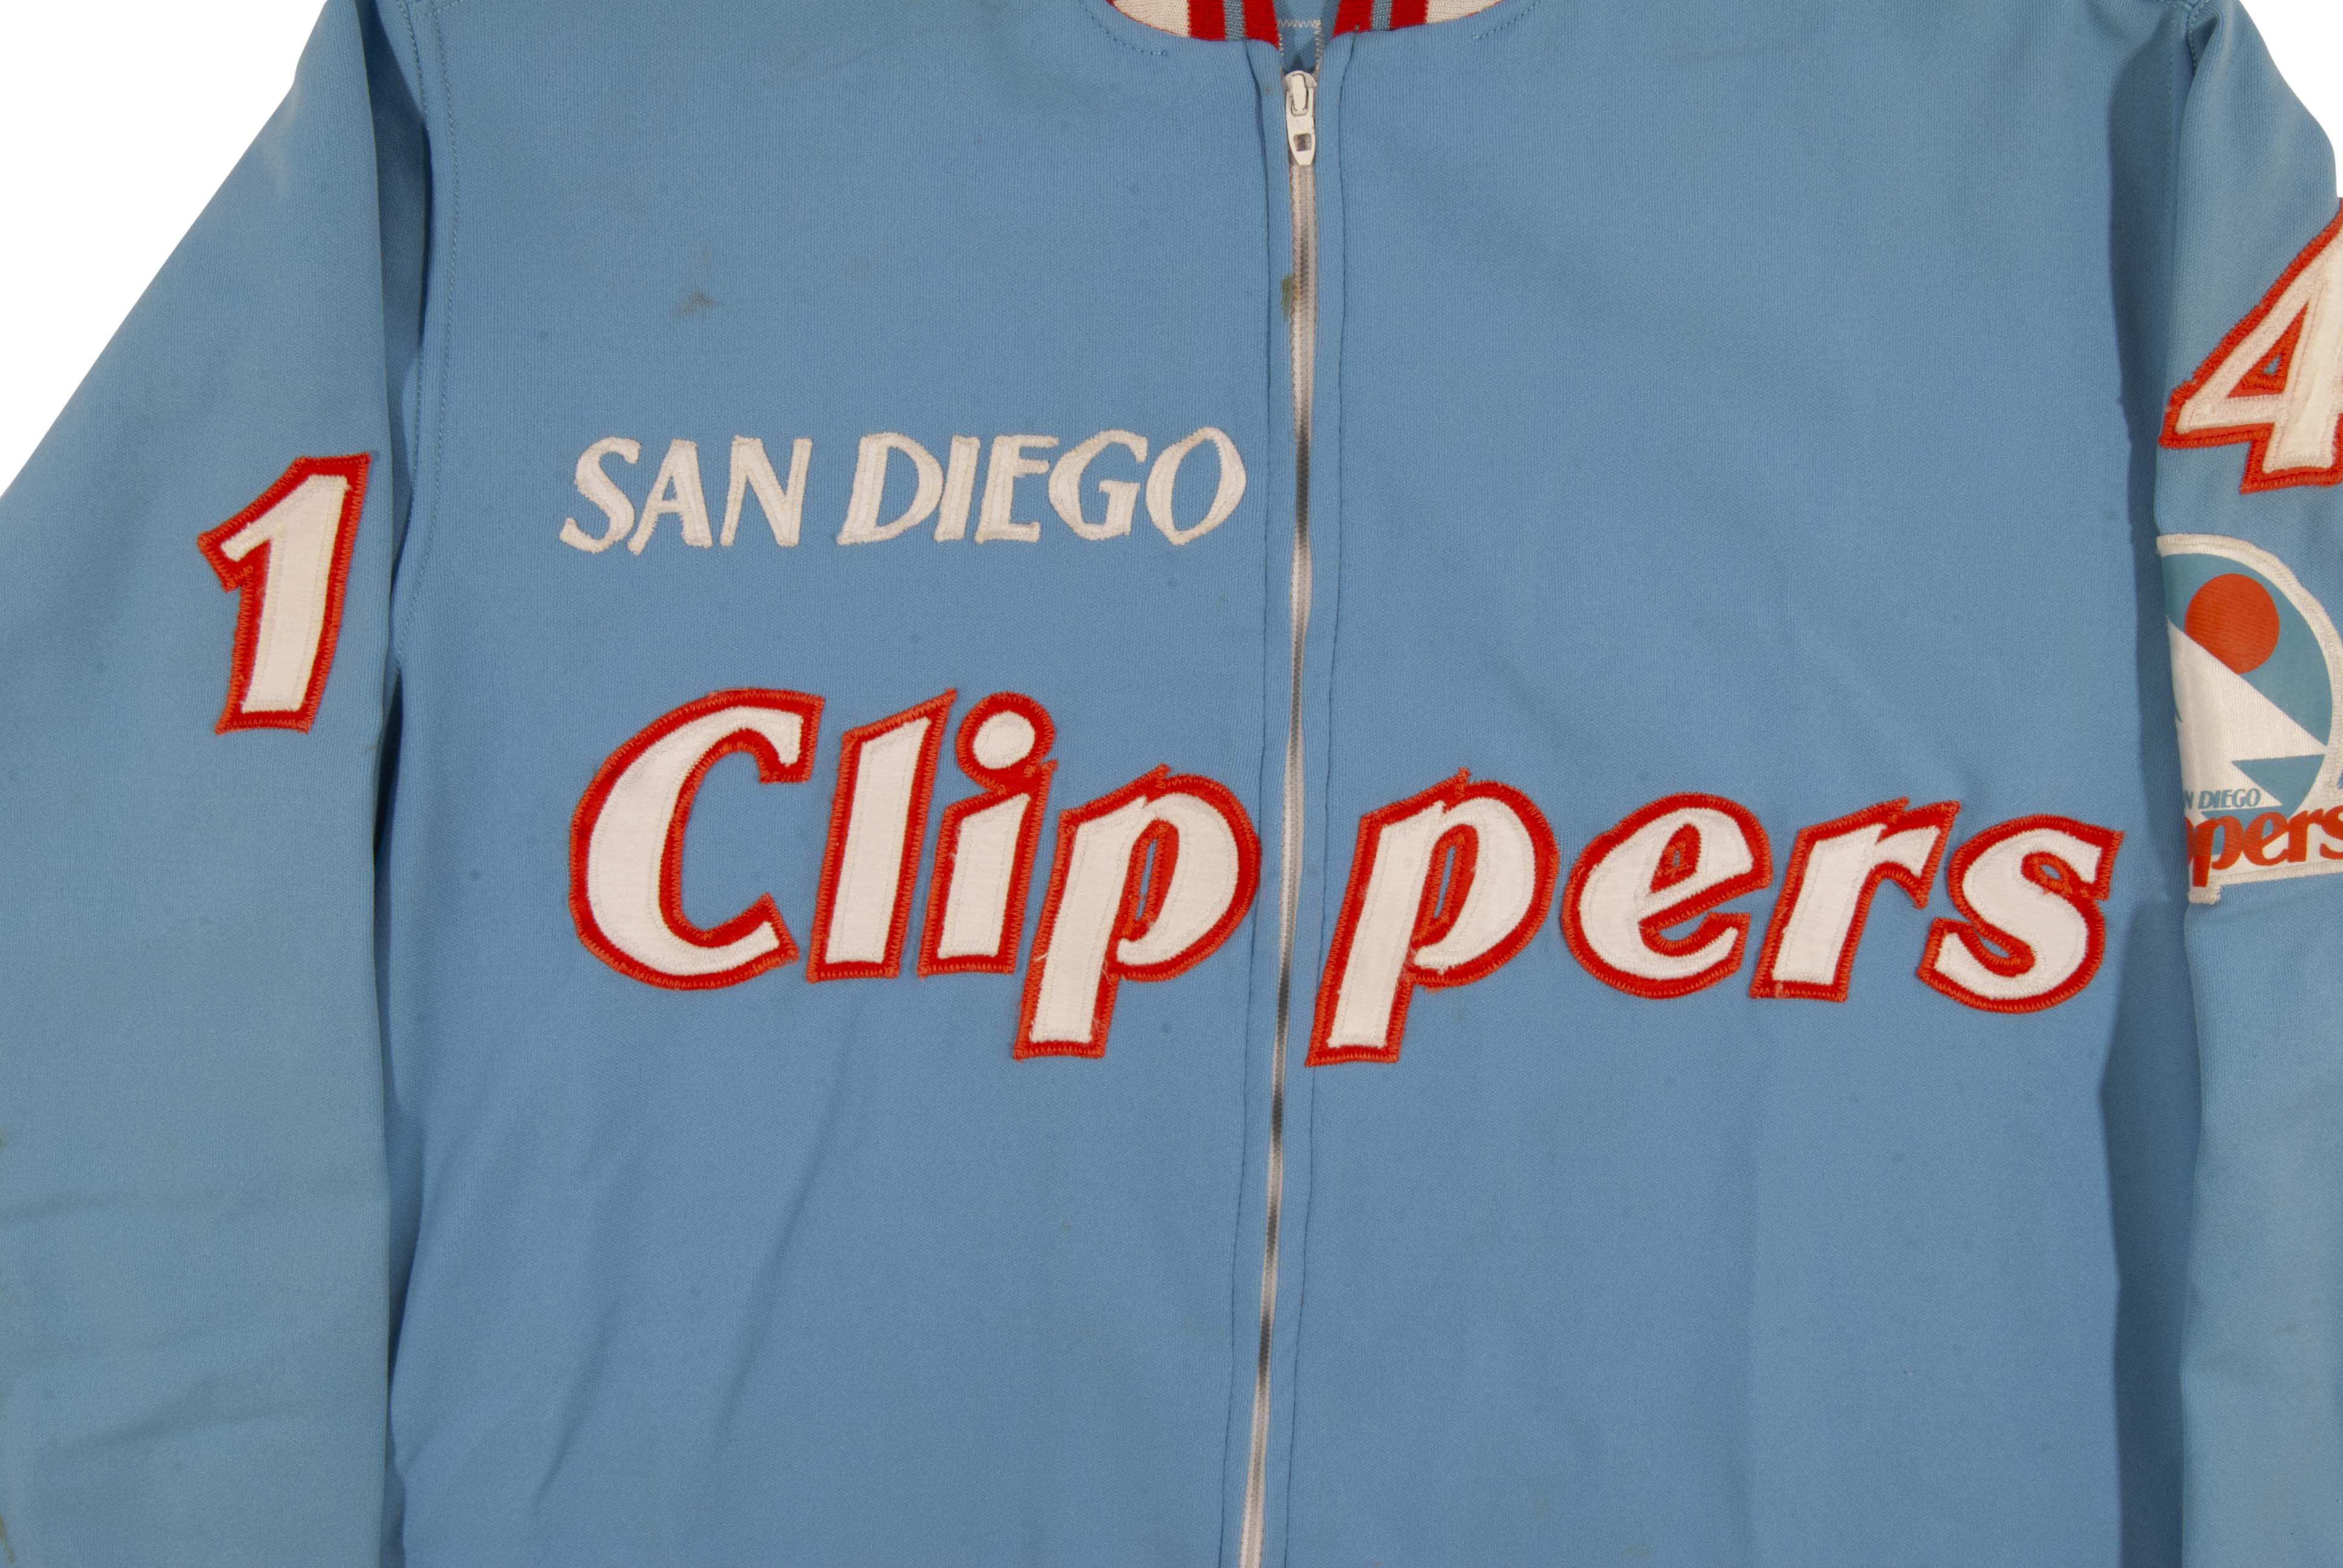 World B. Free San Diego Clippers Jersey for Sale in Cleveland, OH - OfferUp